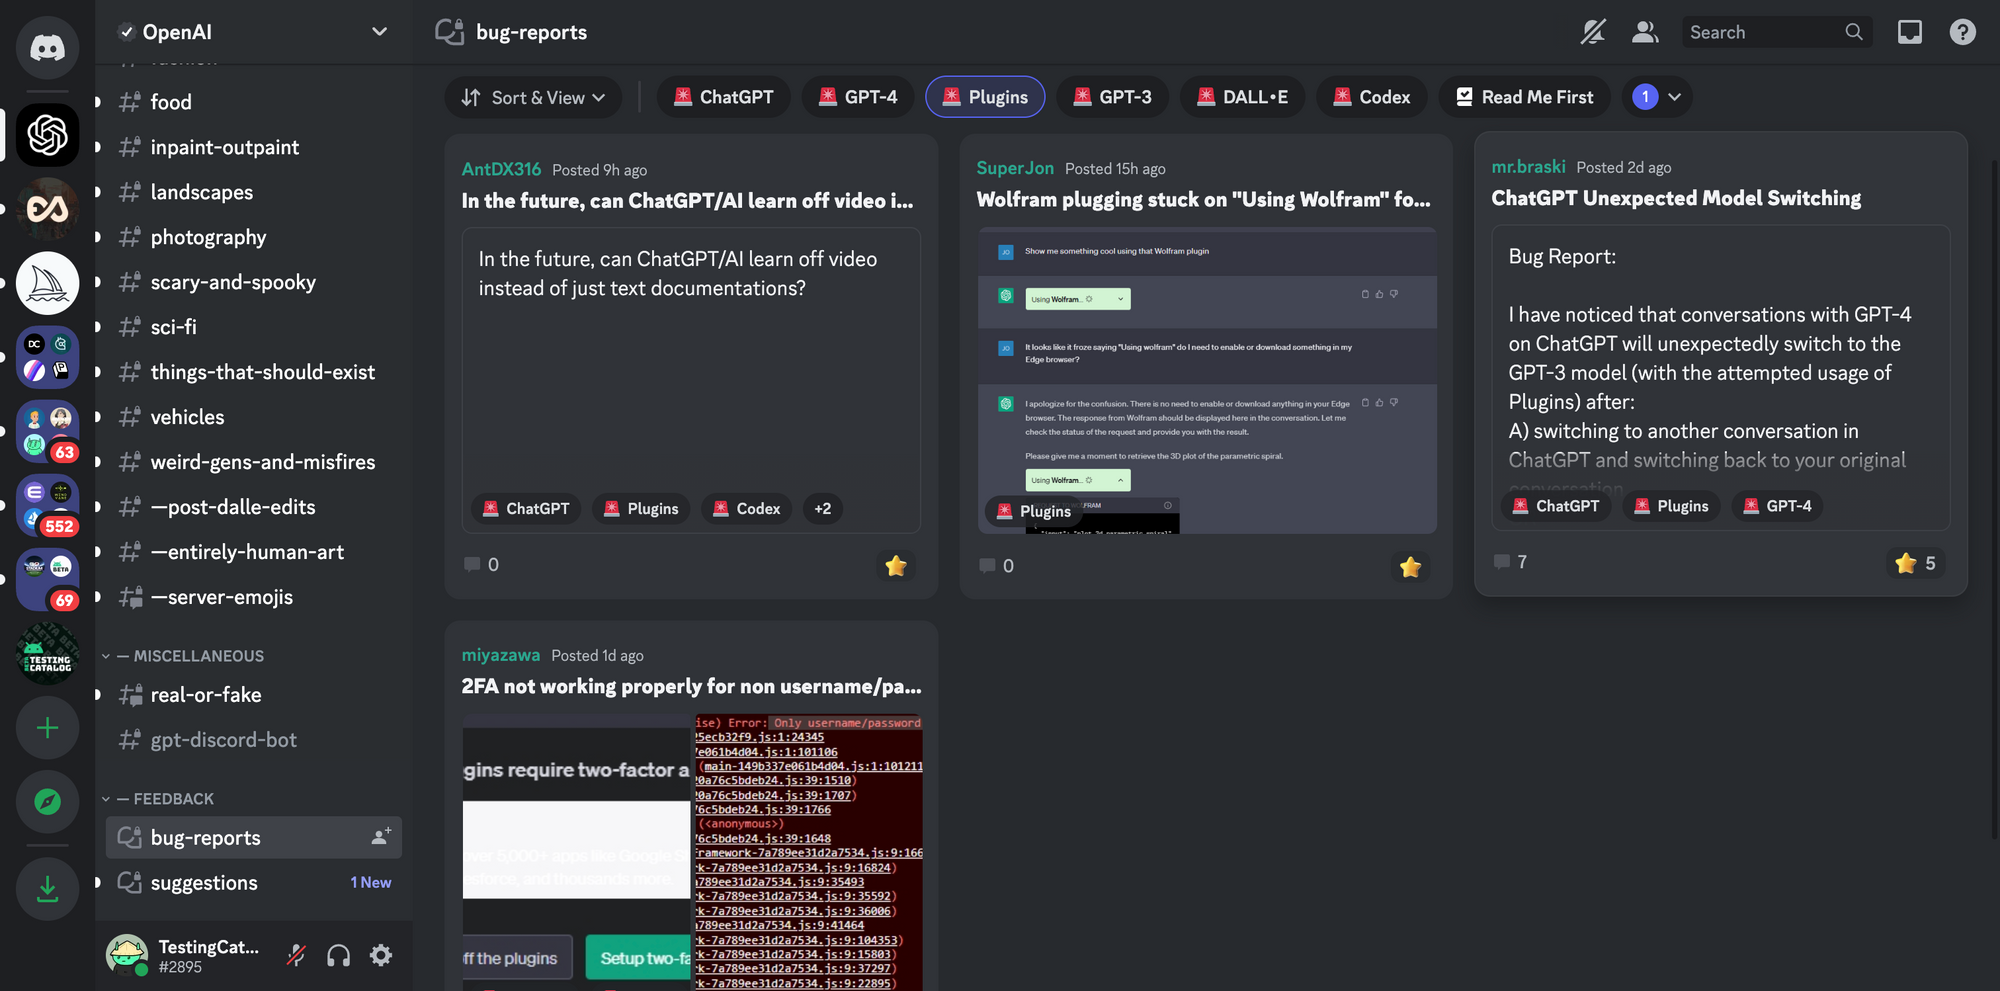 Grid filtered view of existing bug reports for ChatGPT plugins Alpha